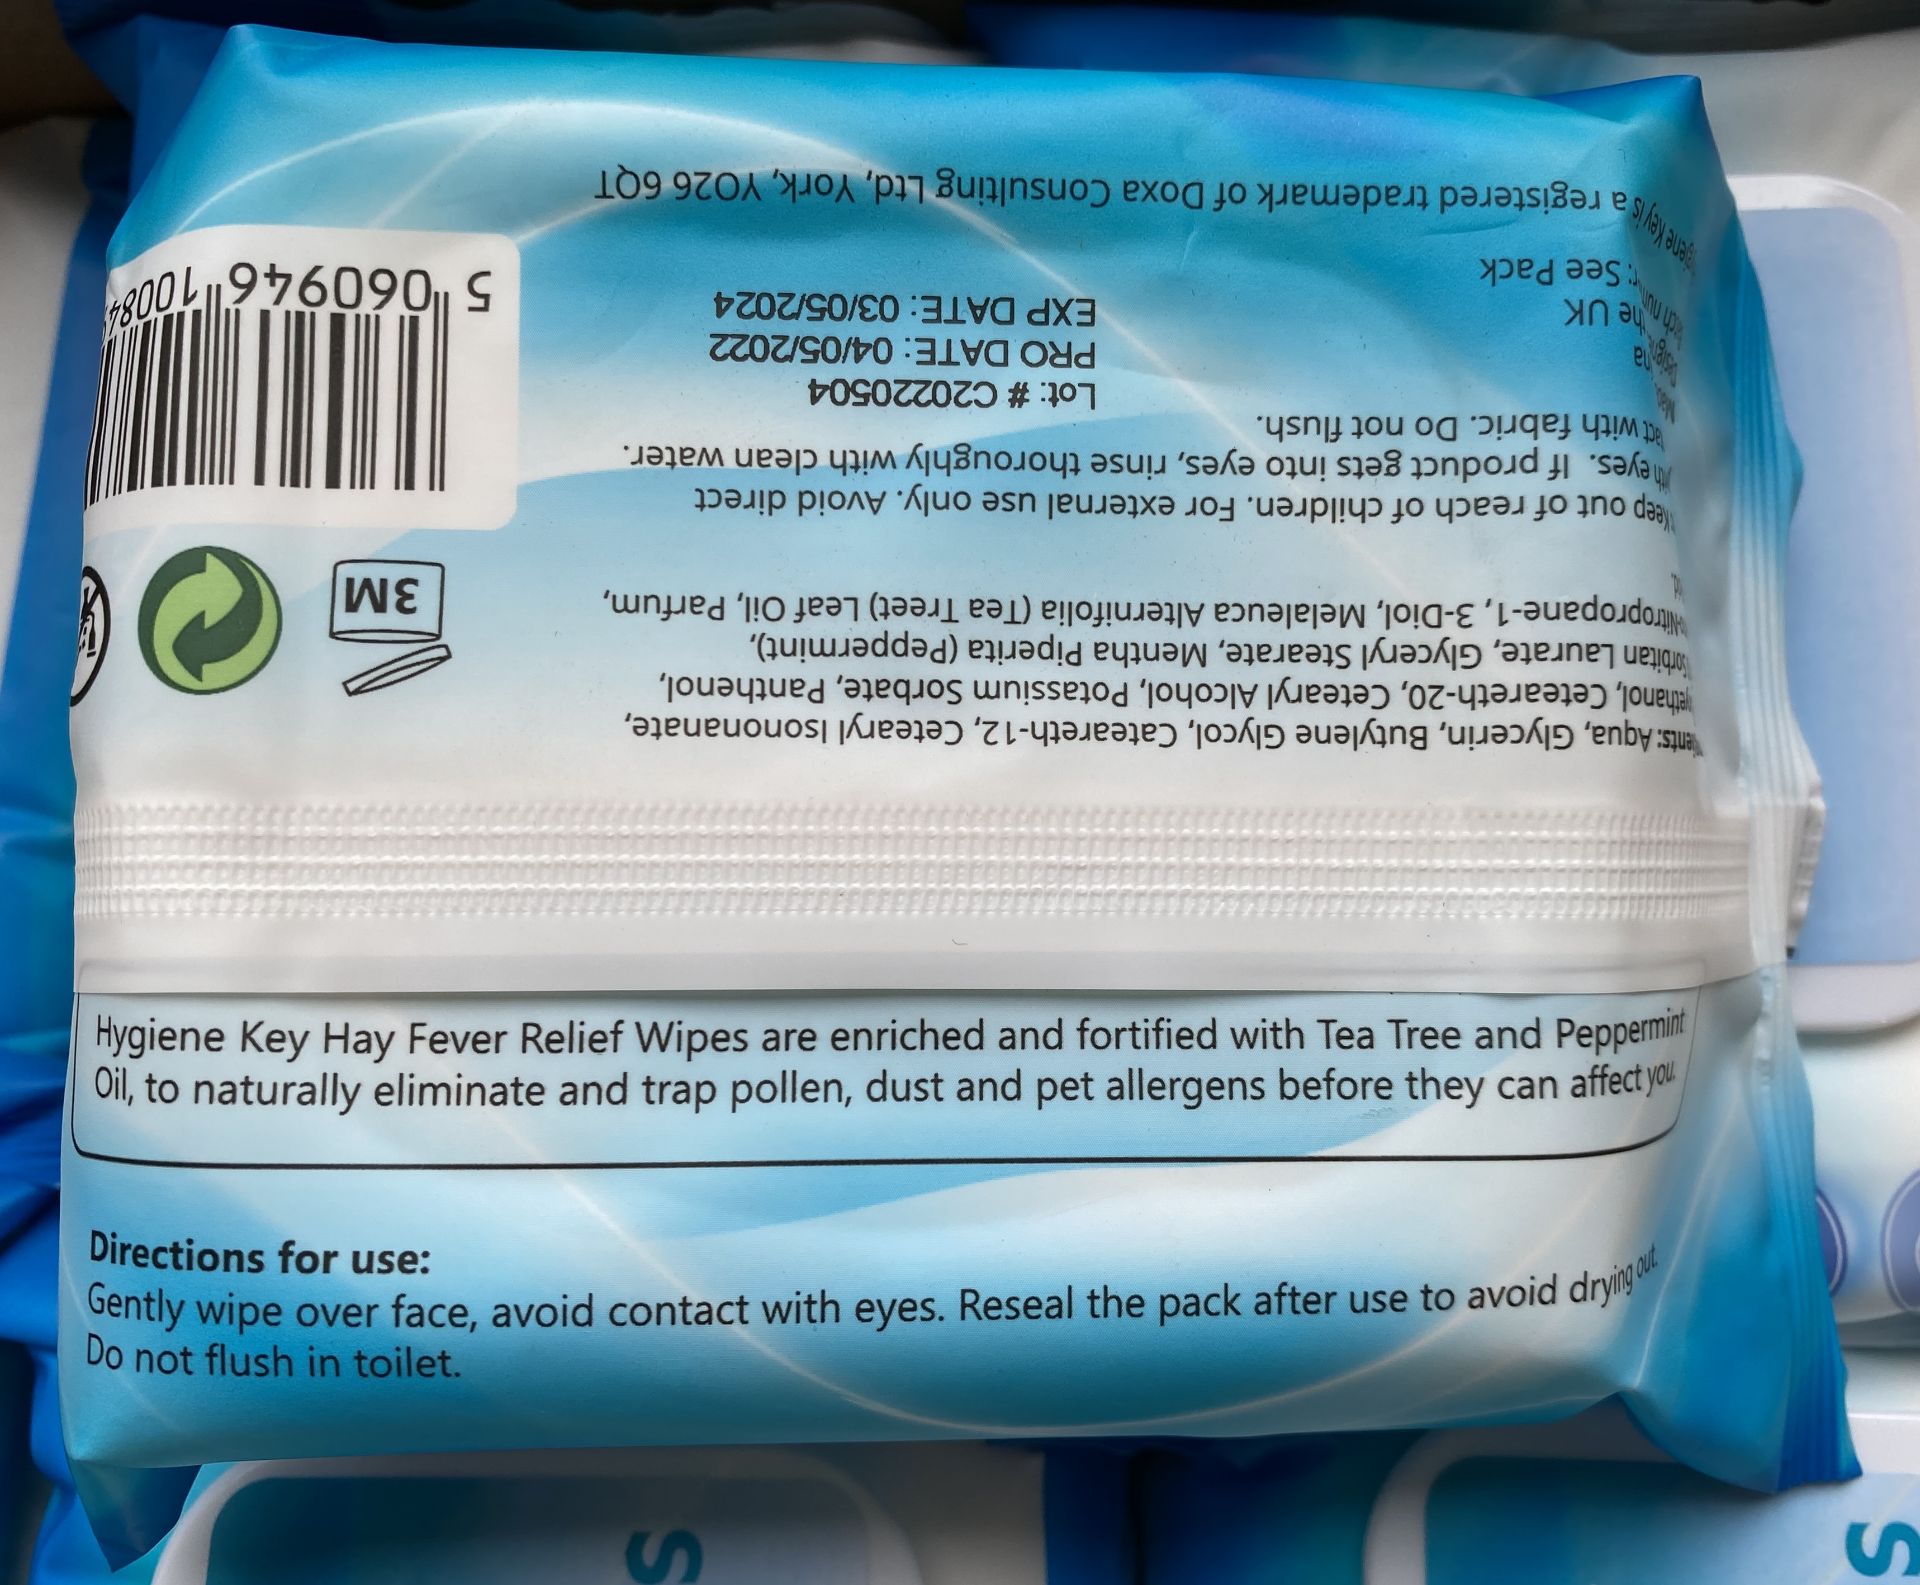 3600 x packs of Hygiene Key Hay Fever Relief Wipes (30 x wipes per pack - expiry date: 30/05/24) - - Image 6 of 8